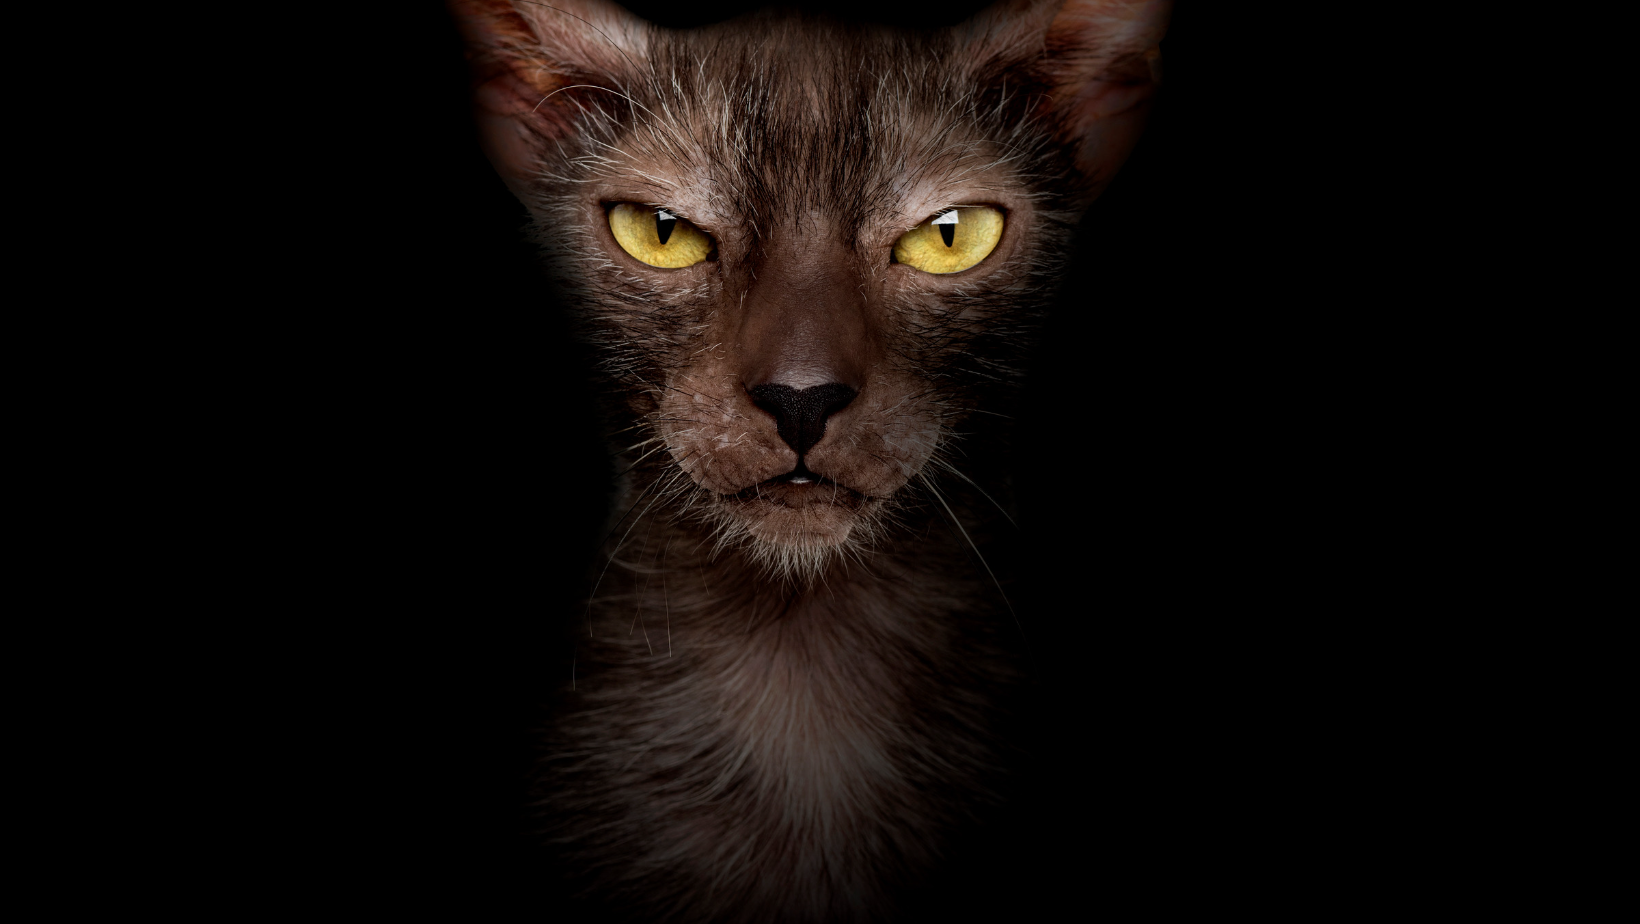 Lykoi or wolf cat